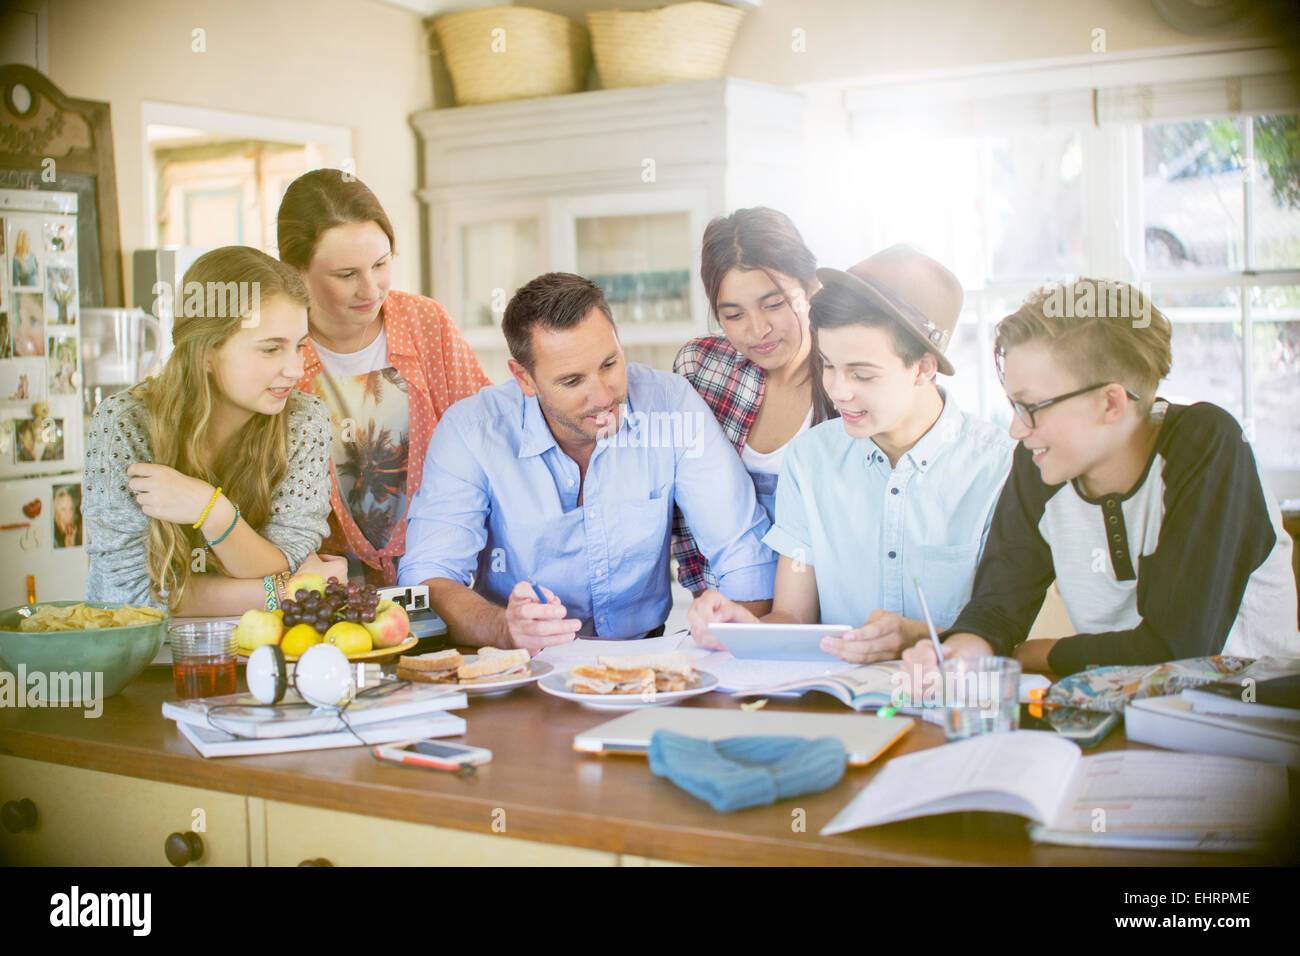 Group of teenagers with mid adult man using digital tablet at table in dining room Stock Photo